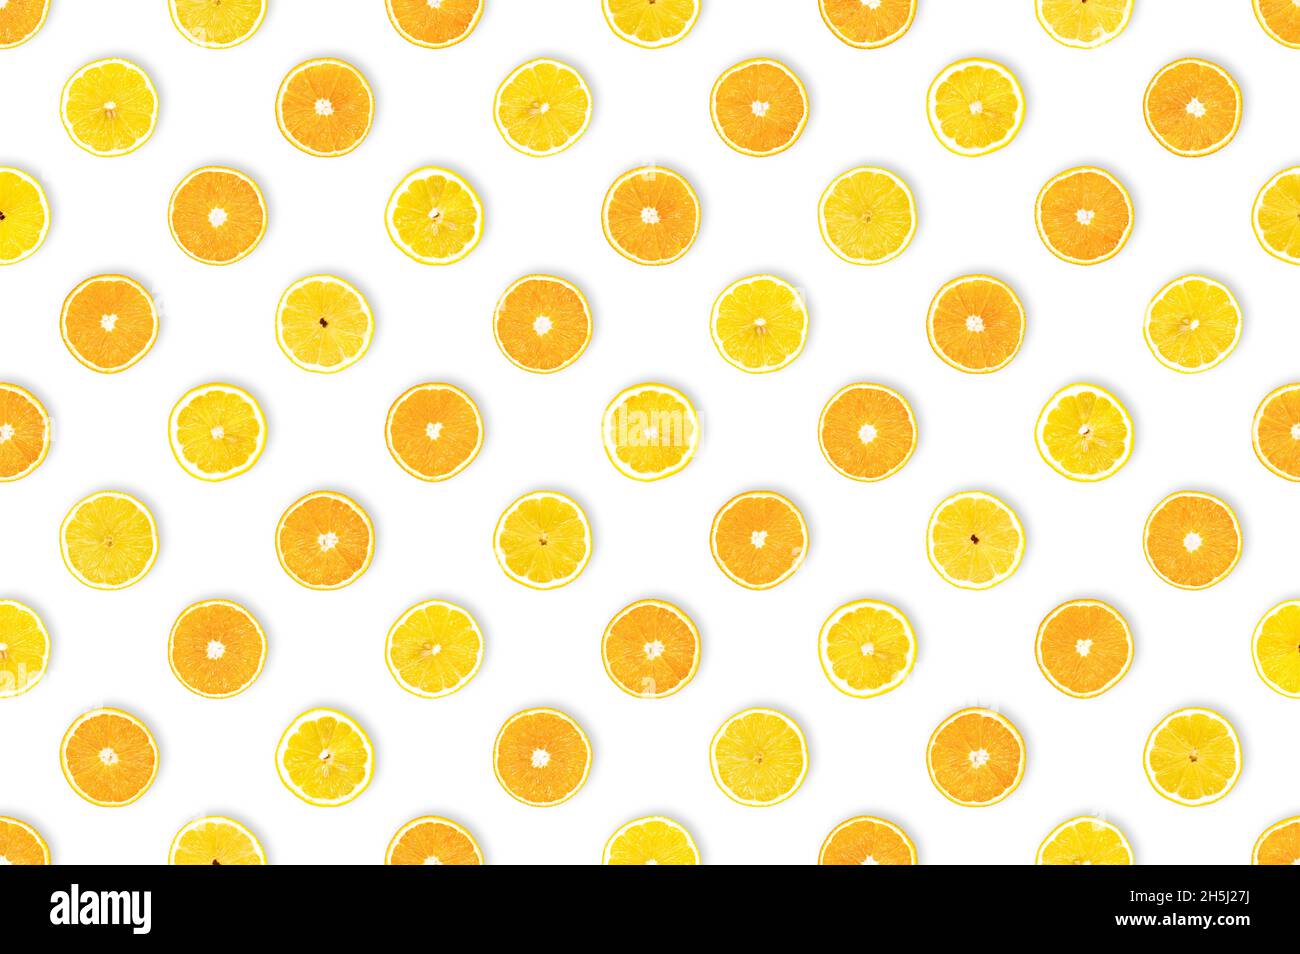 Sweet meets sour: healthy diet concept. Fruit with important nutrients. Pattern of freshly cut lemon and orange slices against white background. Stock Photo